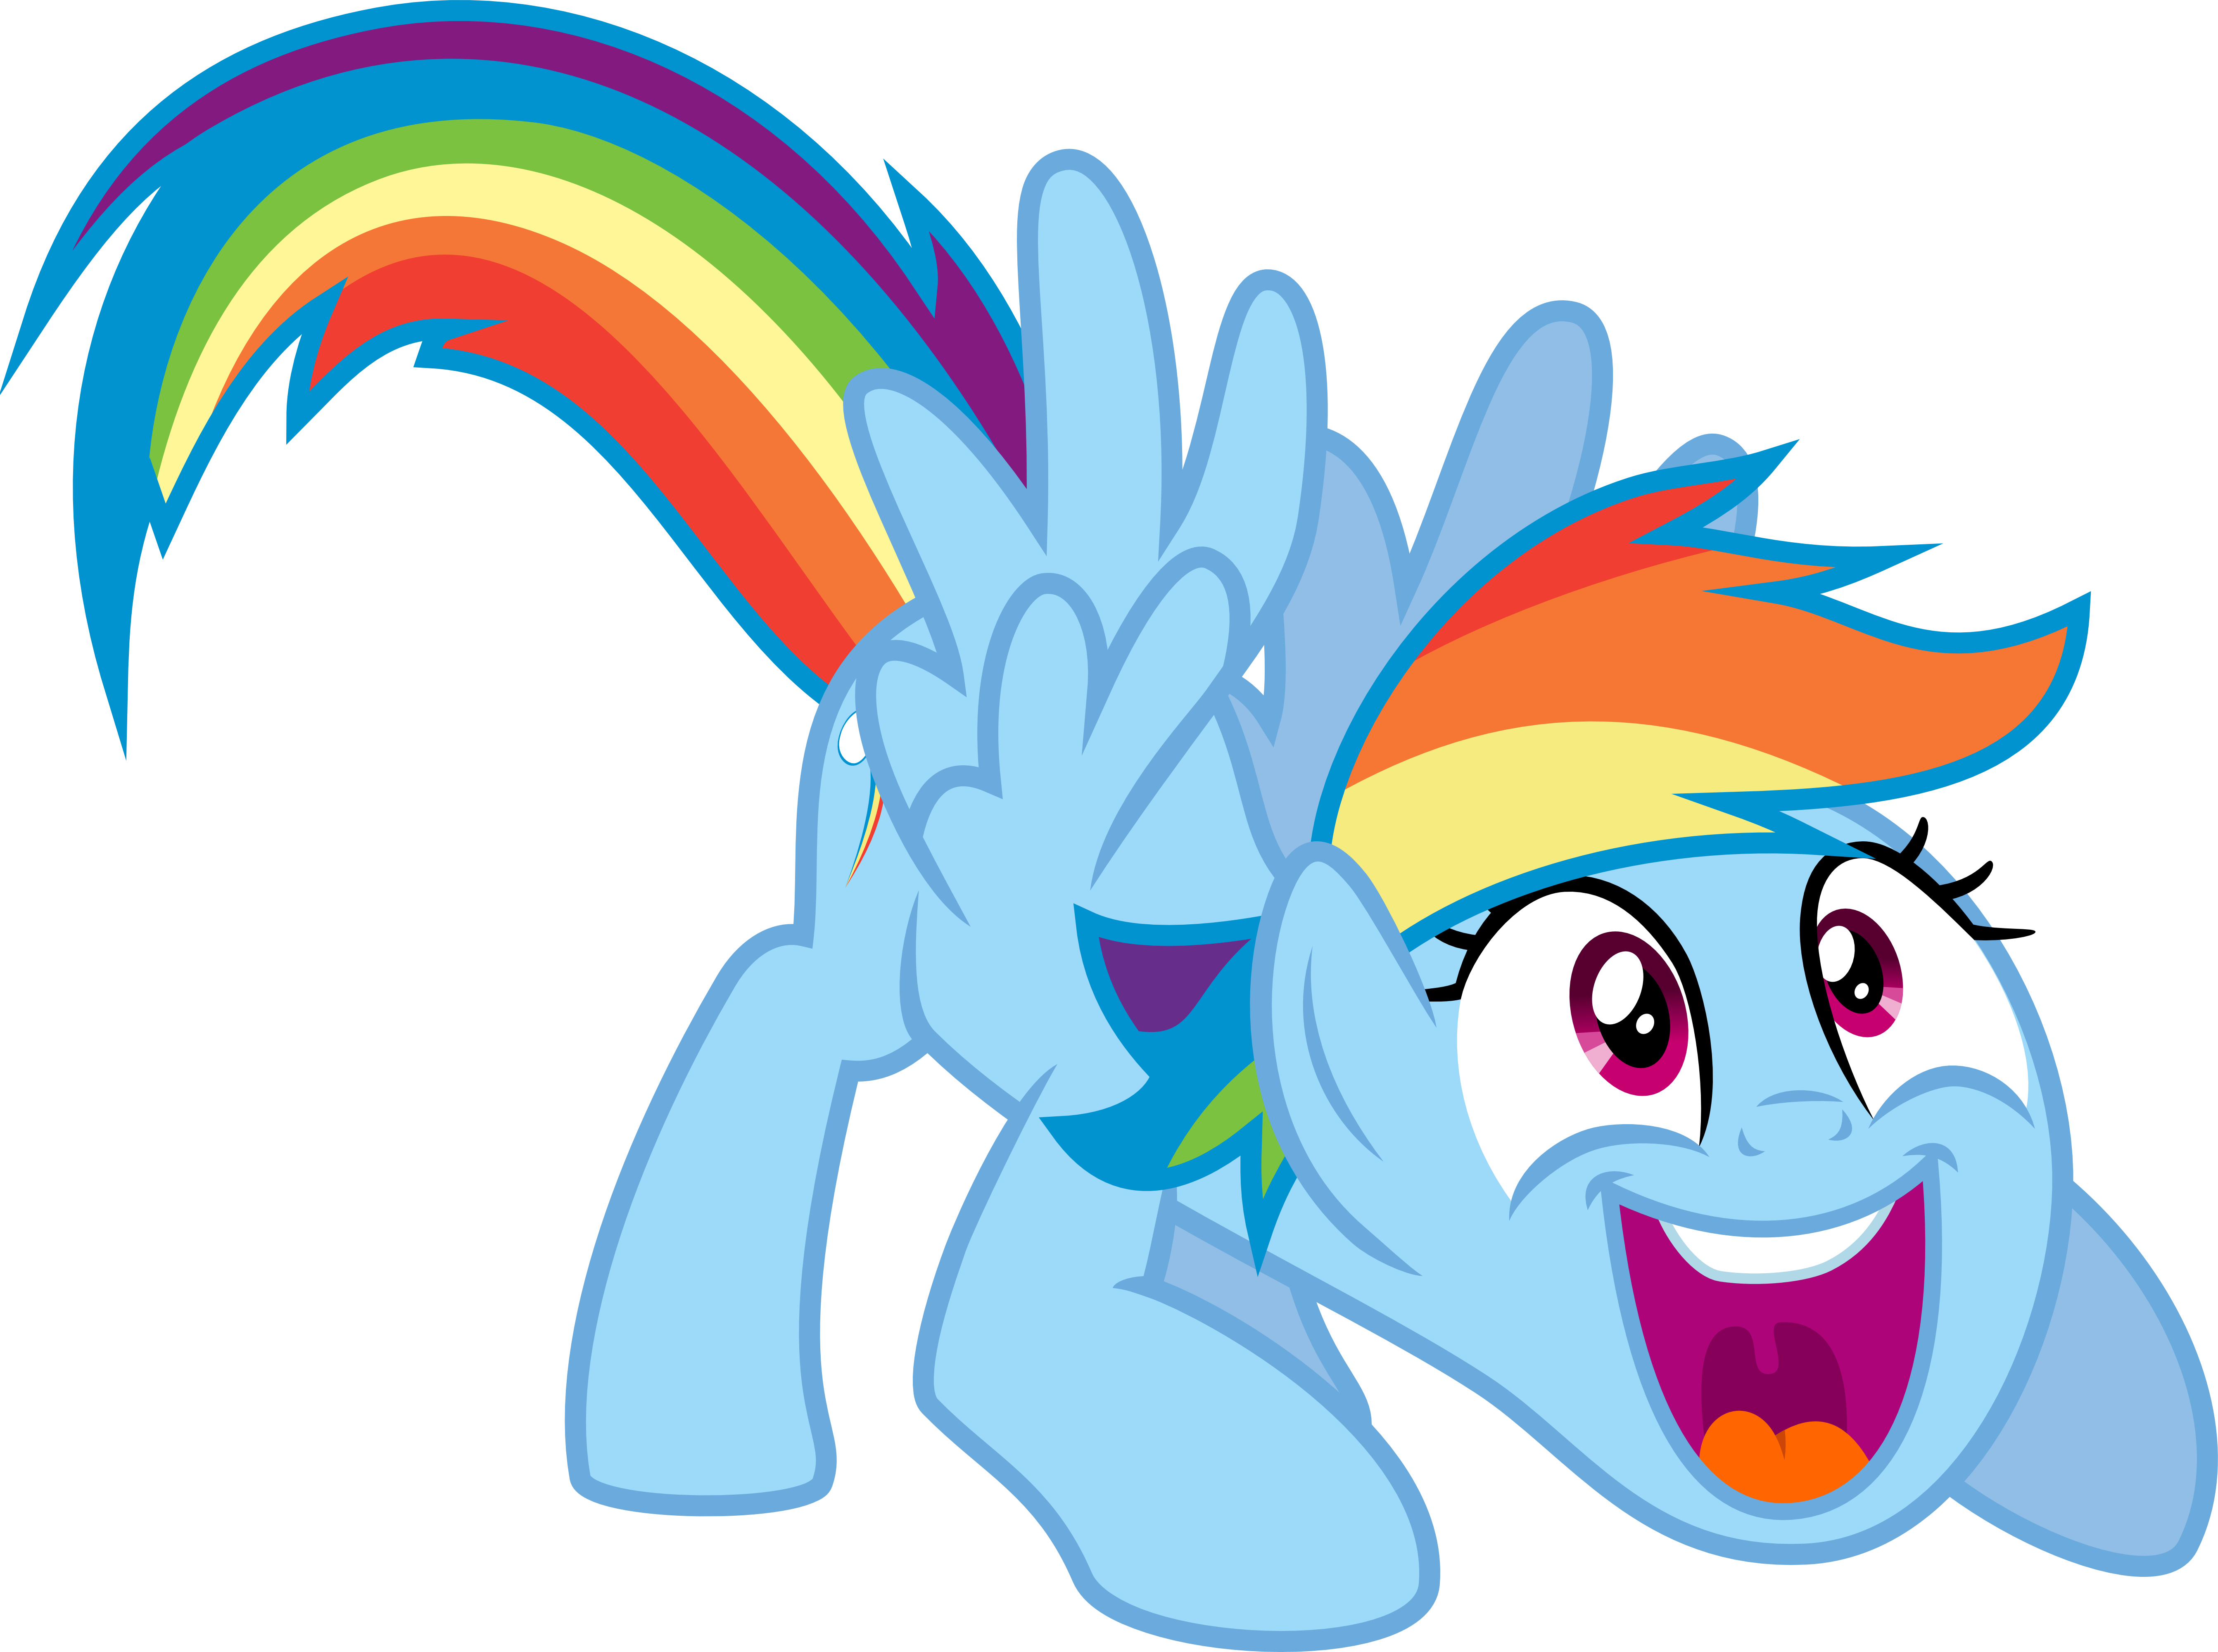 My little pony png images